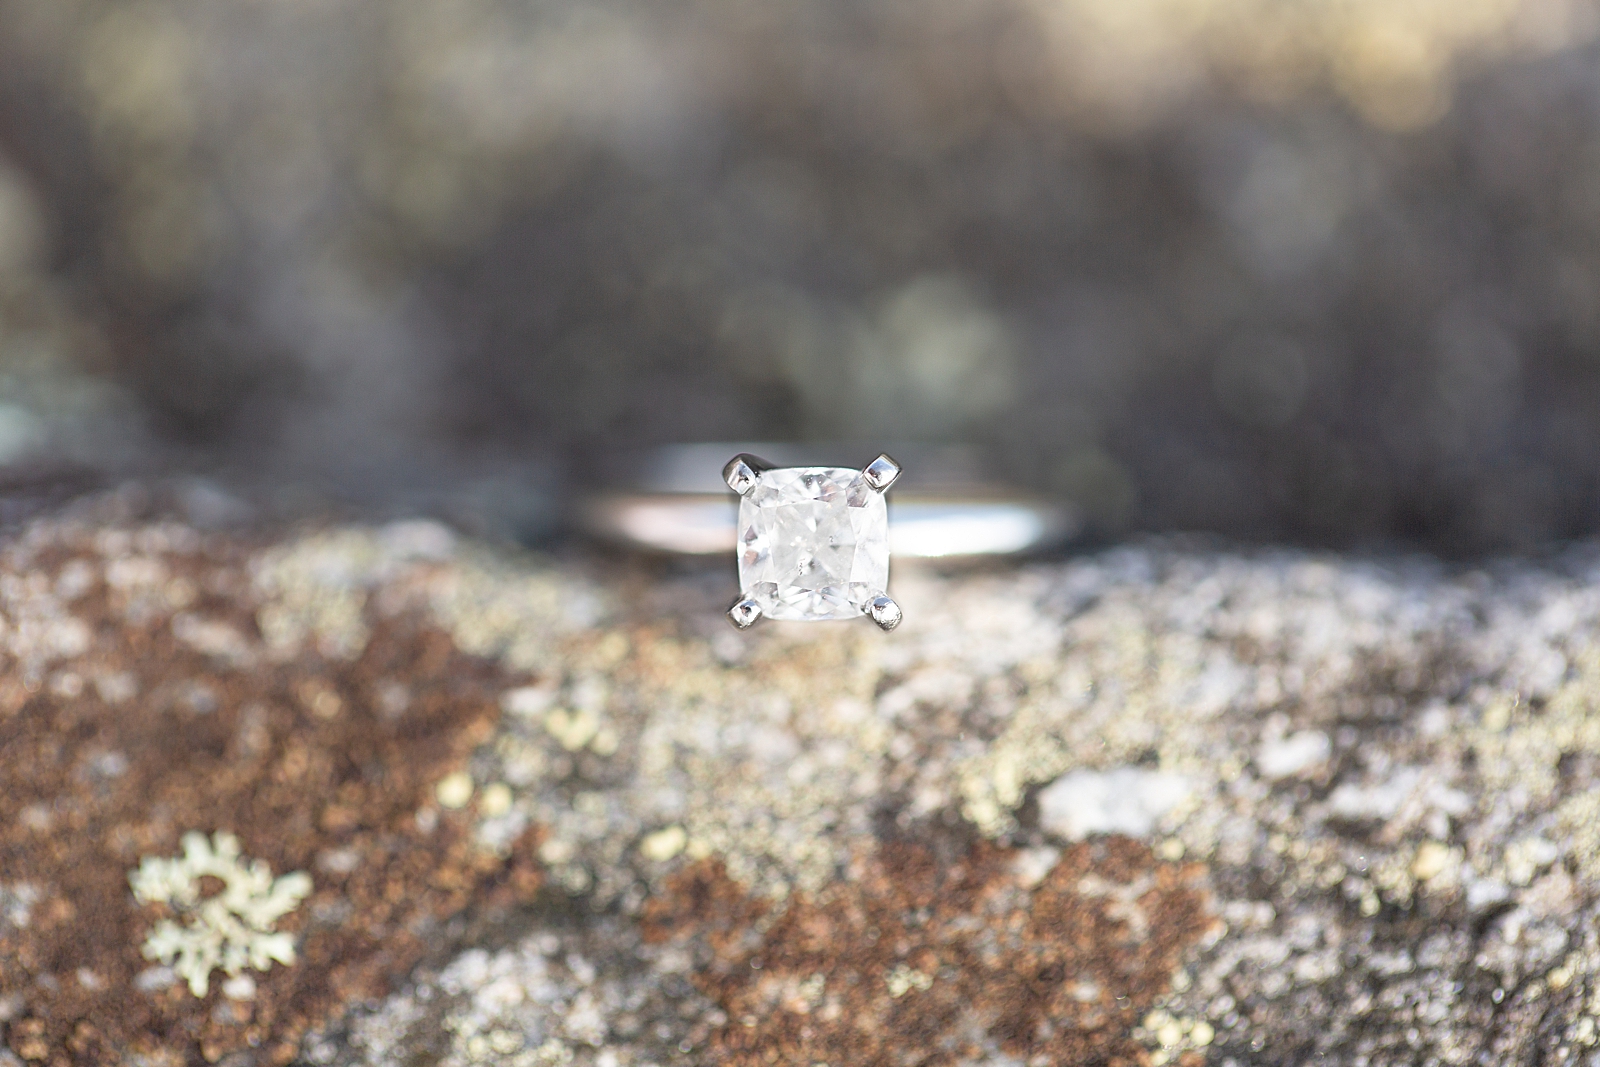 Craggy Gardens Engagement Ring Photo